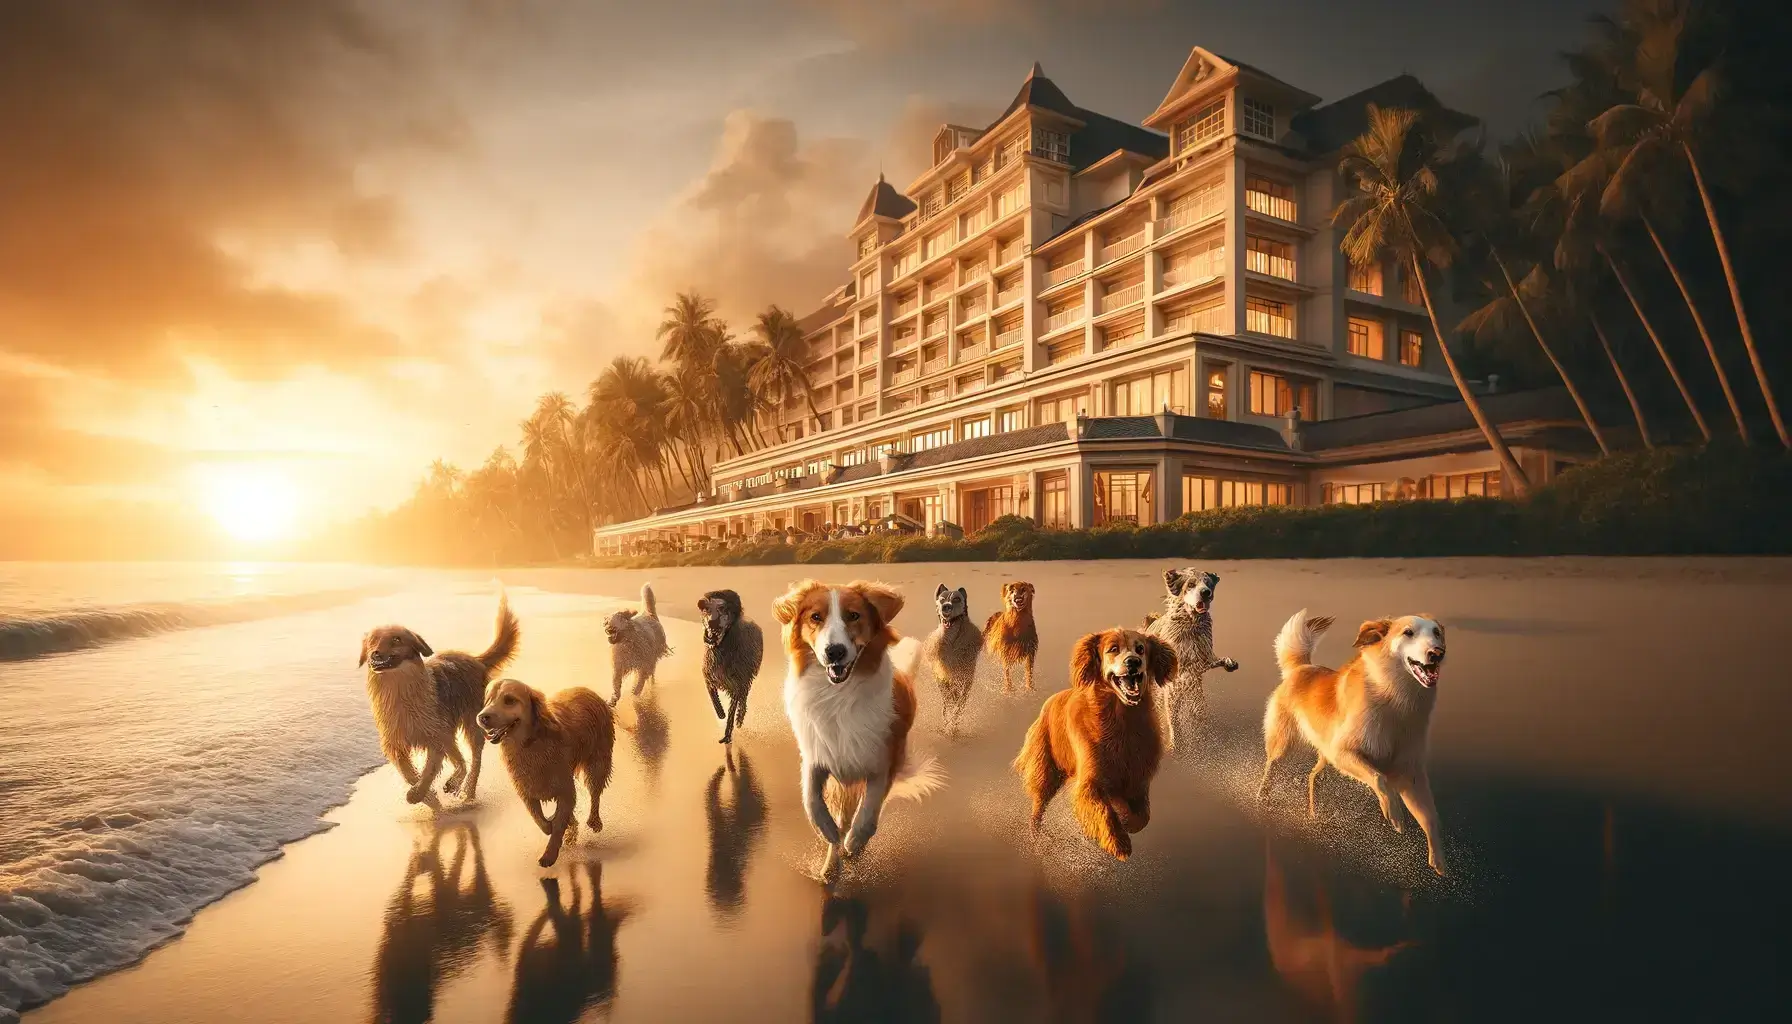 dogs running on the beach with a beautiful hotel in the background, capturing the joy and elegance of the scene.